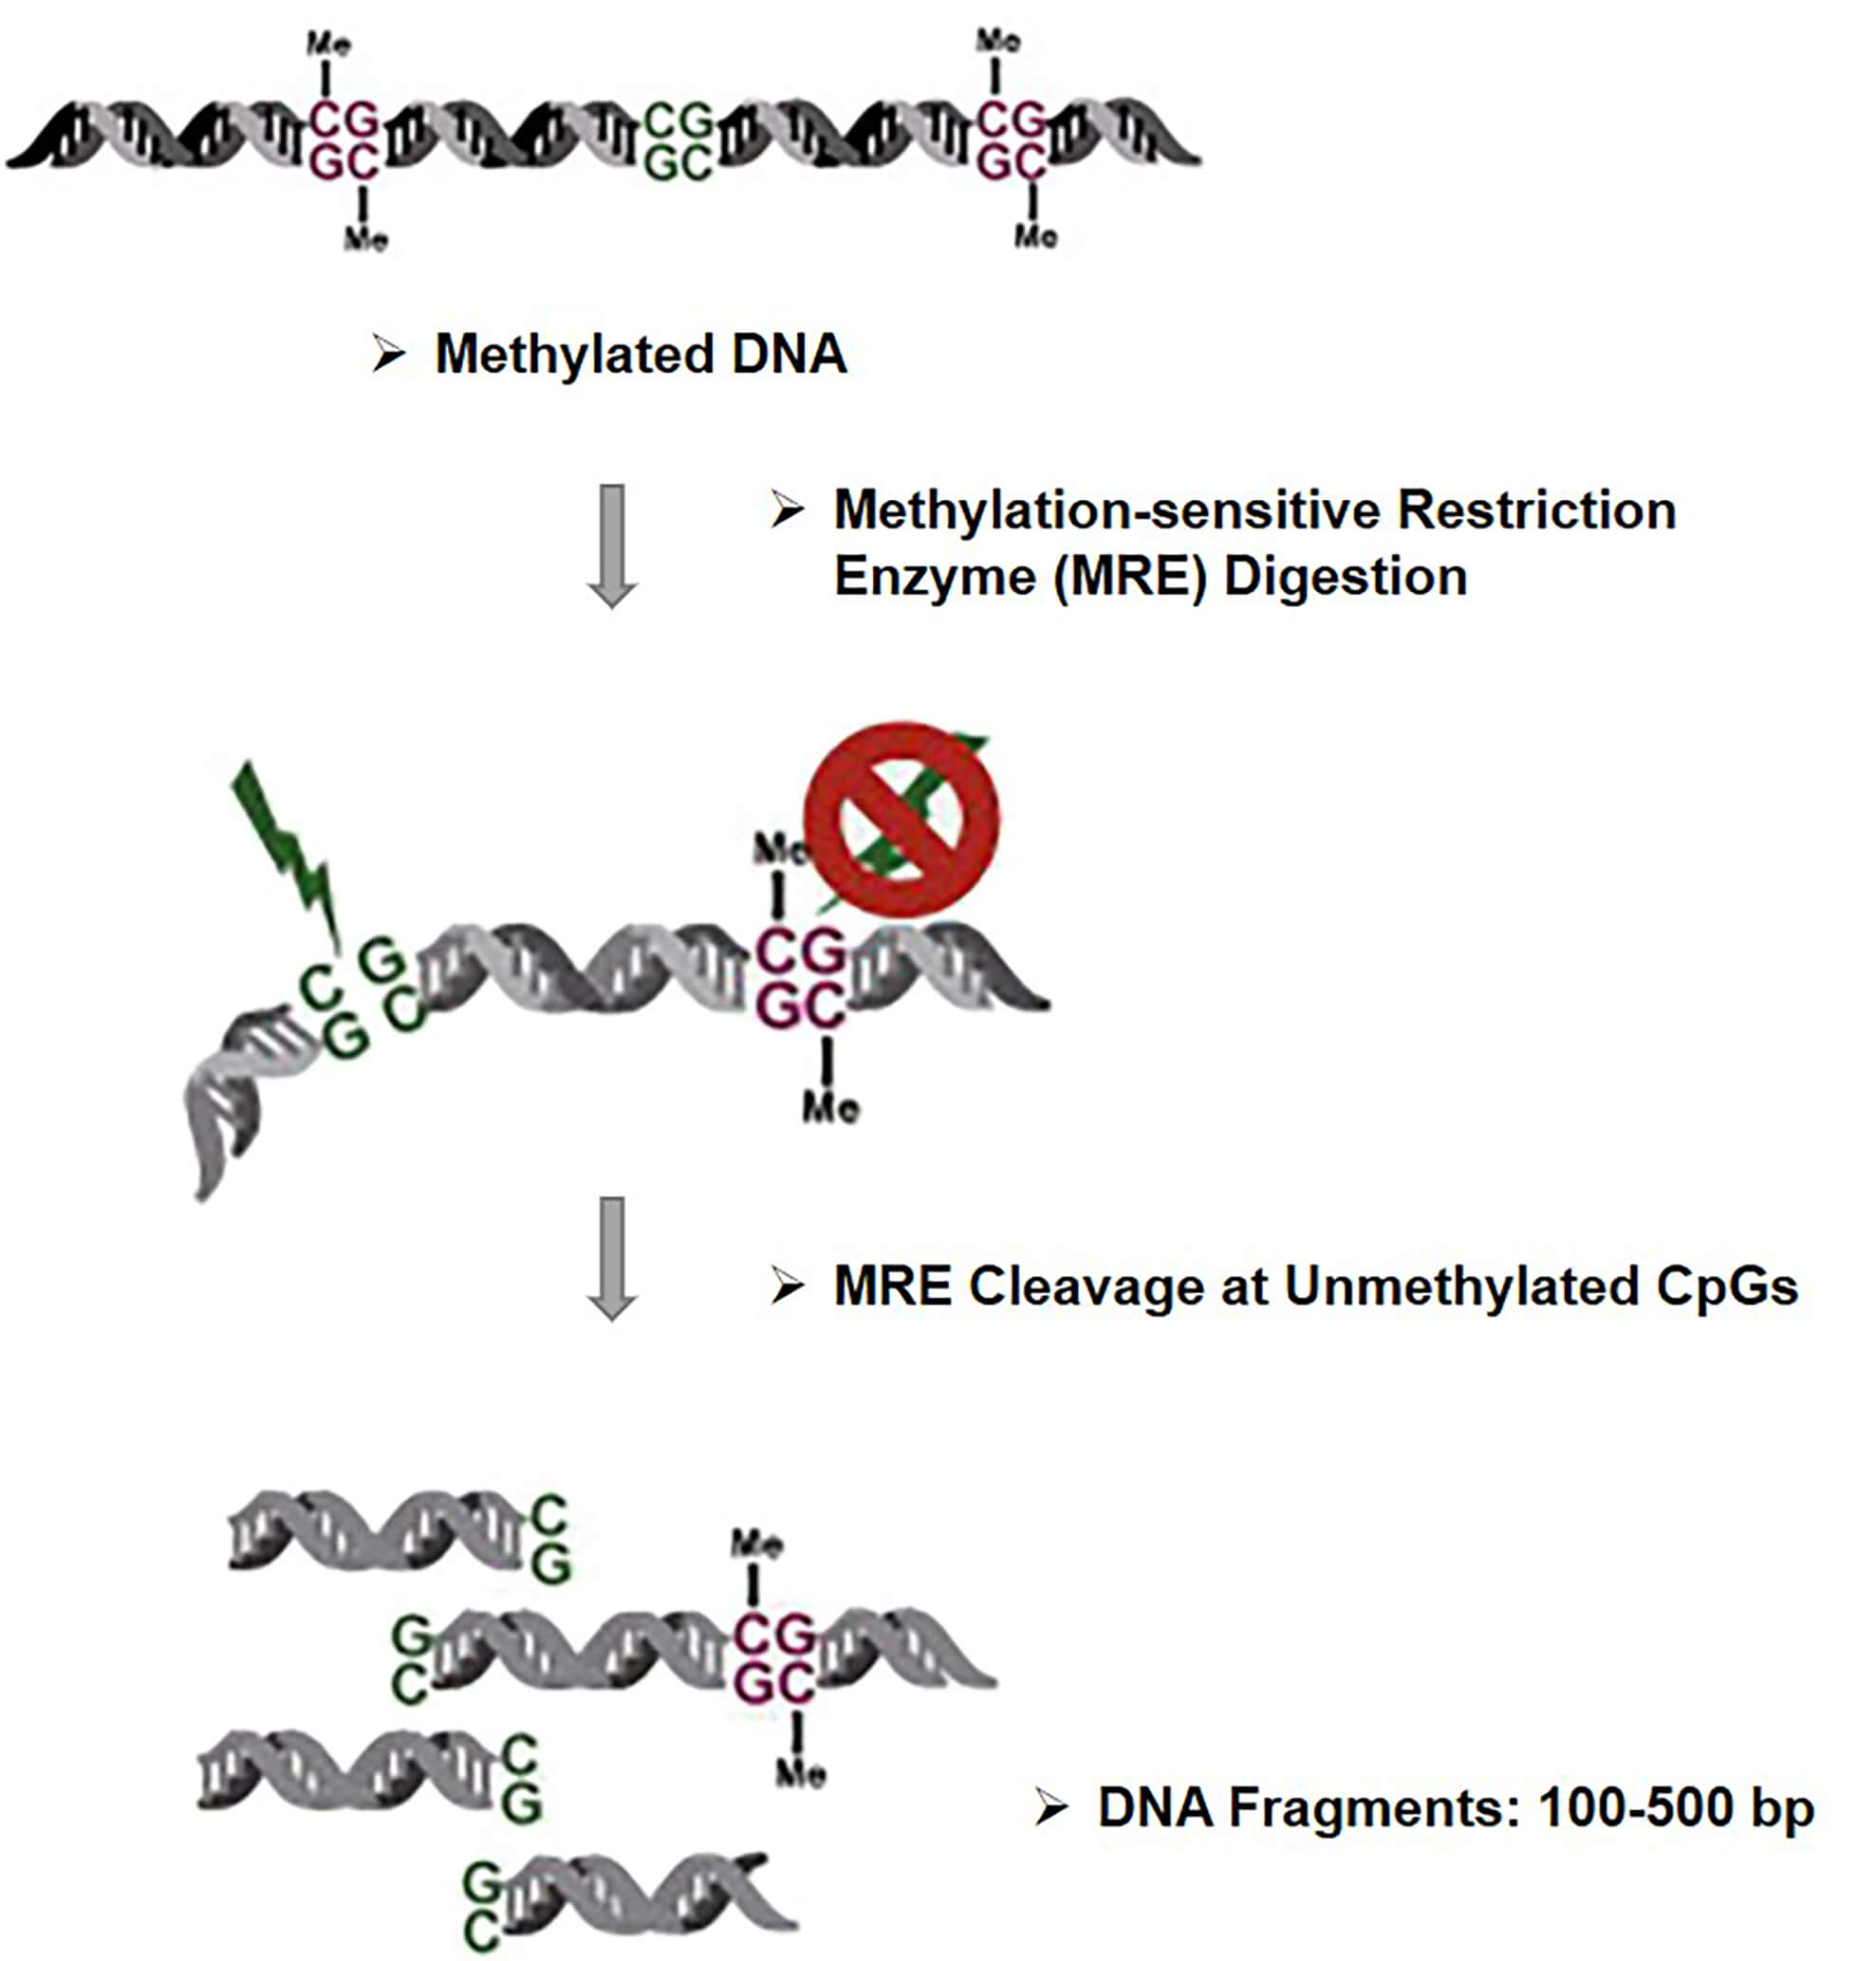 MRE-Seq represents methylation-sensitive restriction enzyme digestion followed by sequencing.